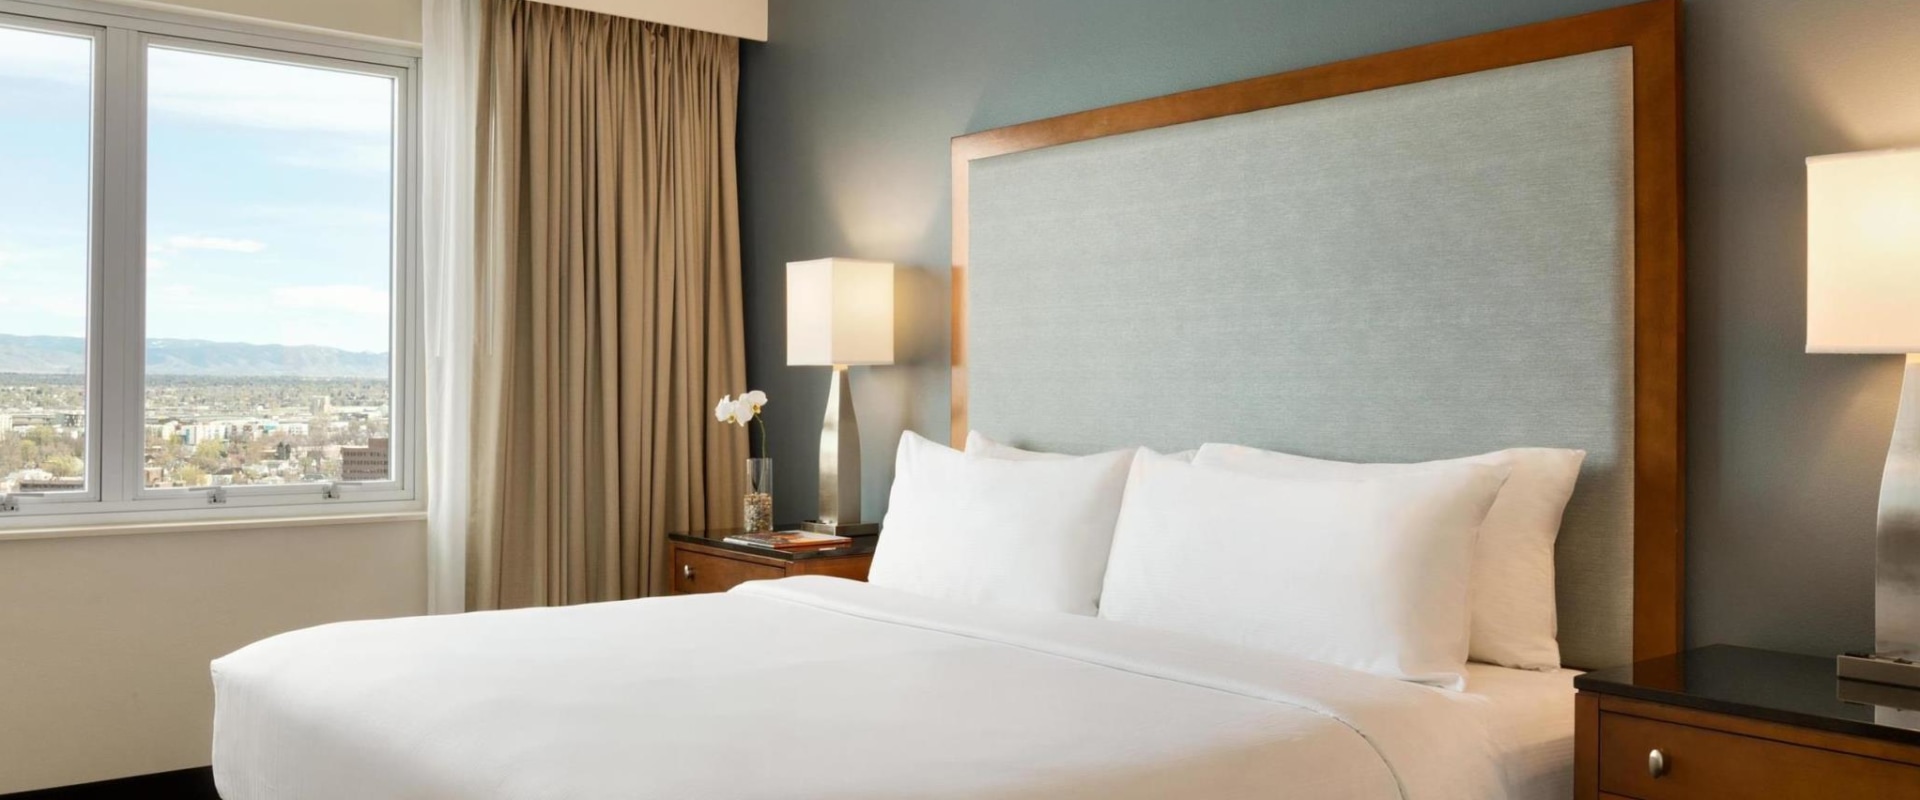 Business Hotels in Denver, Colorado: Find the Perfect Suite for Your Business Trip